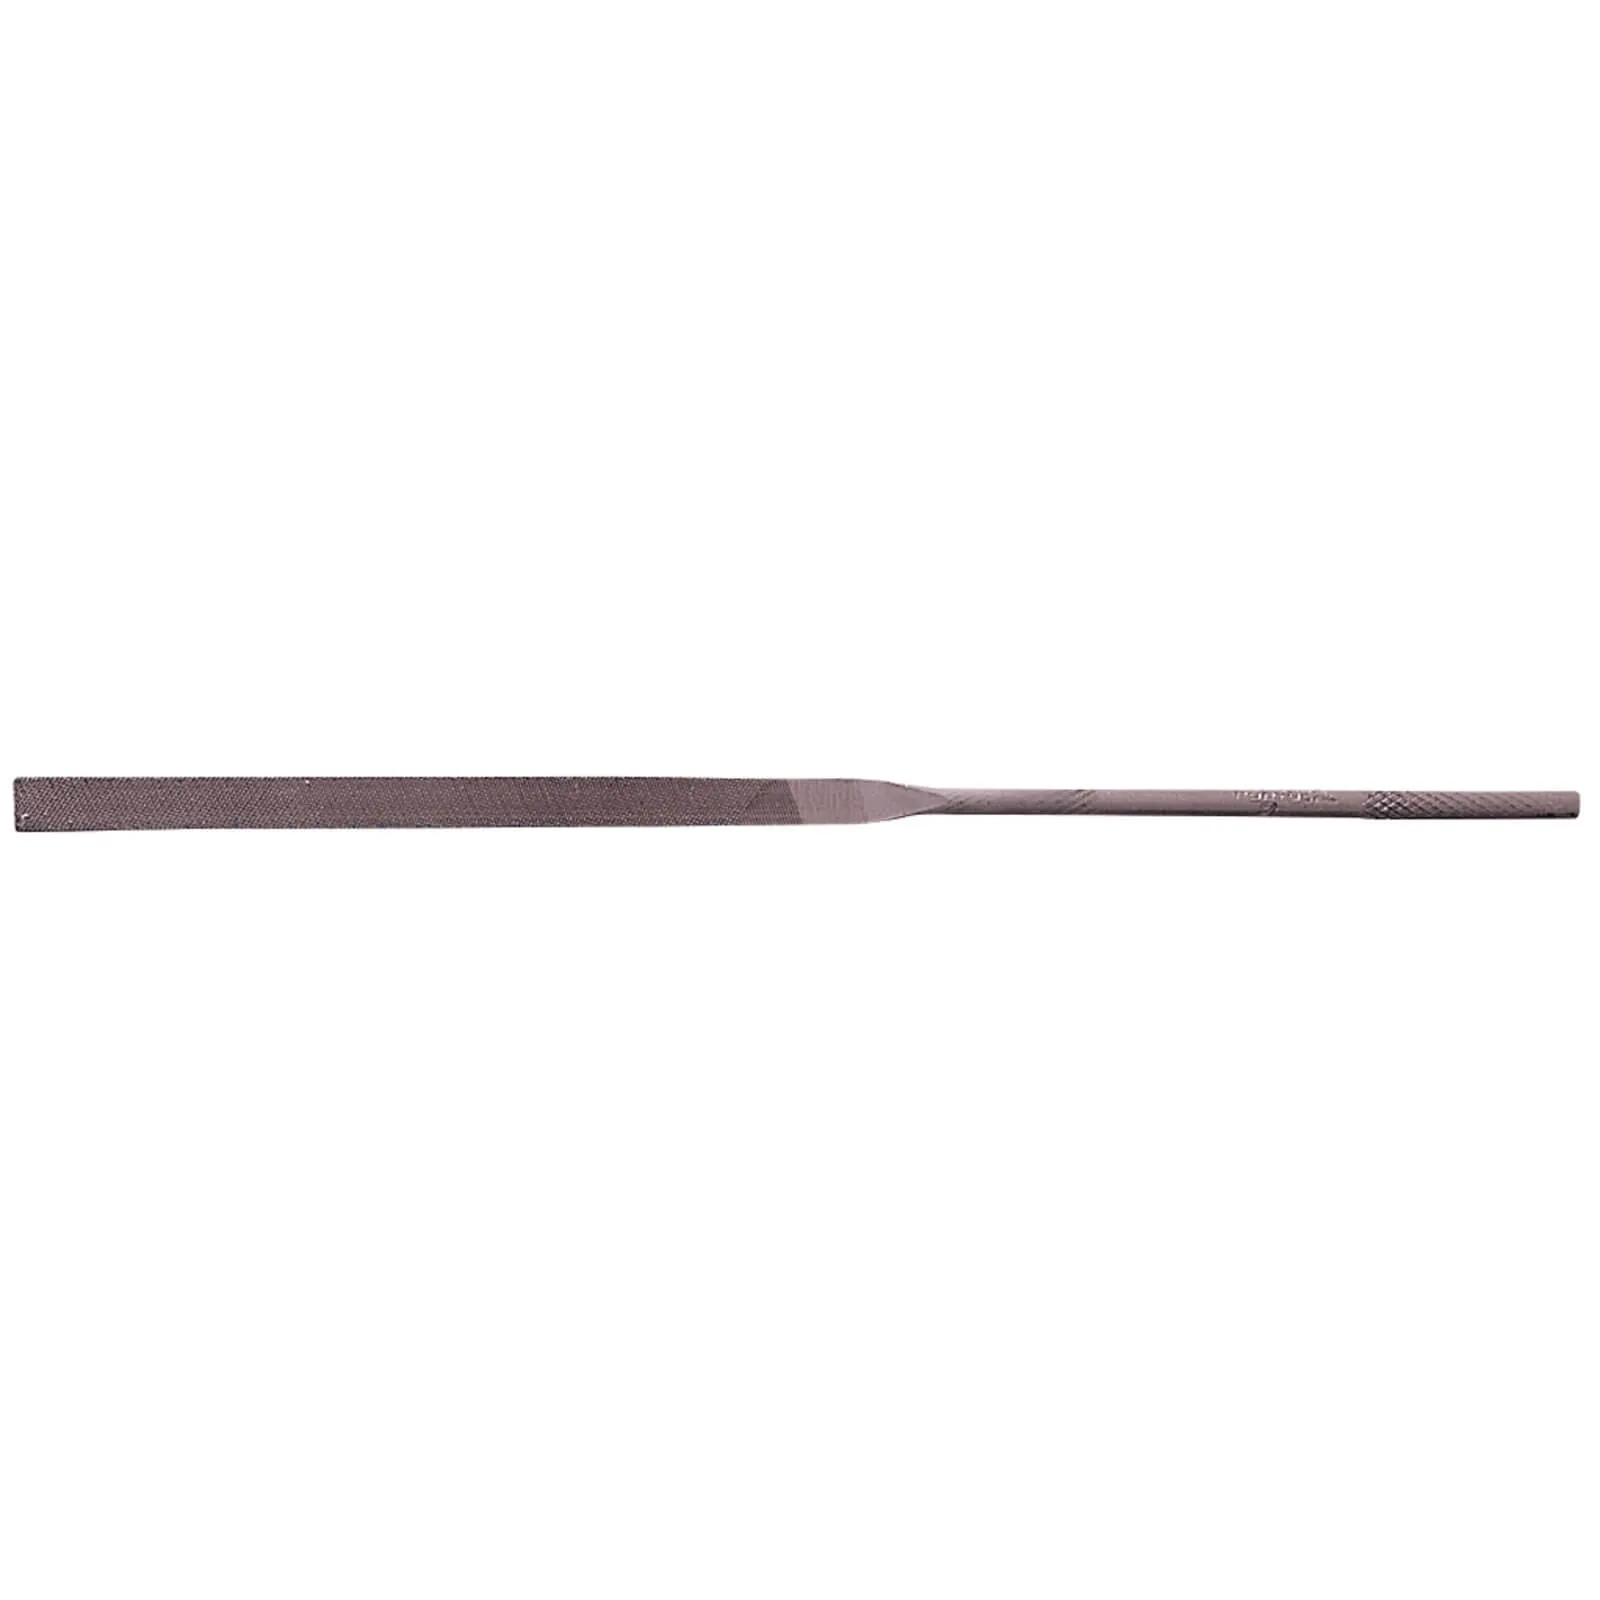 Draper Flat Parallel Needle File - 160mm, No 2, Pack of 12